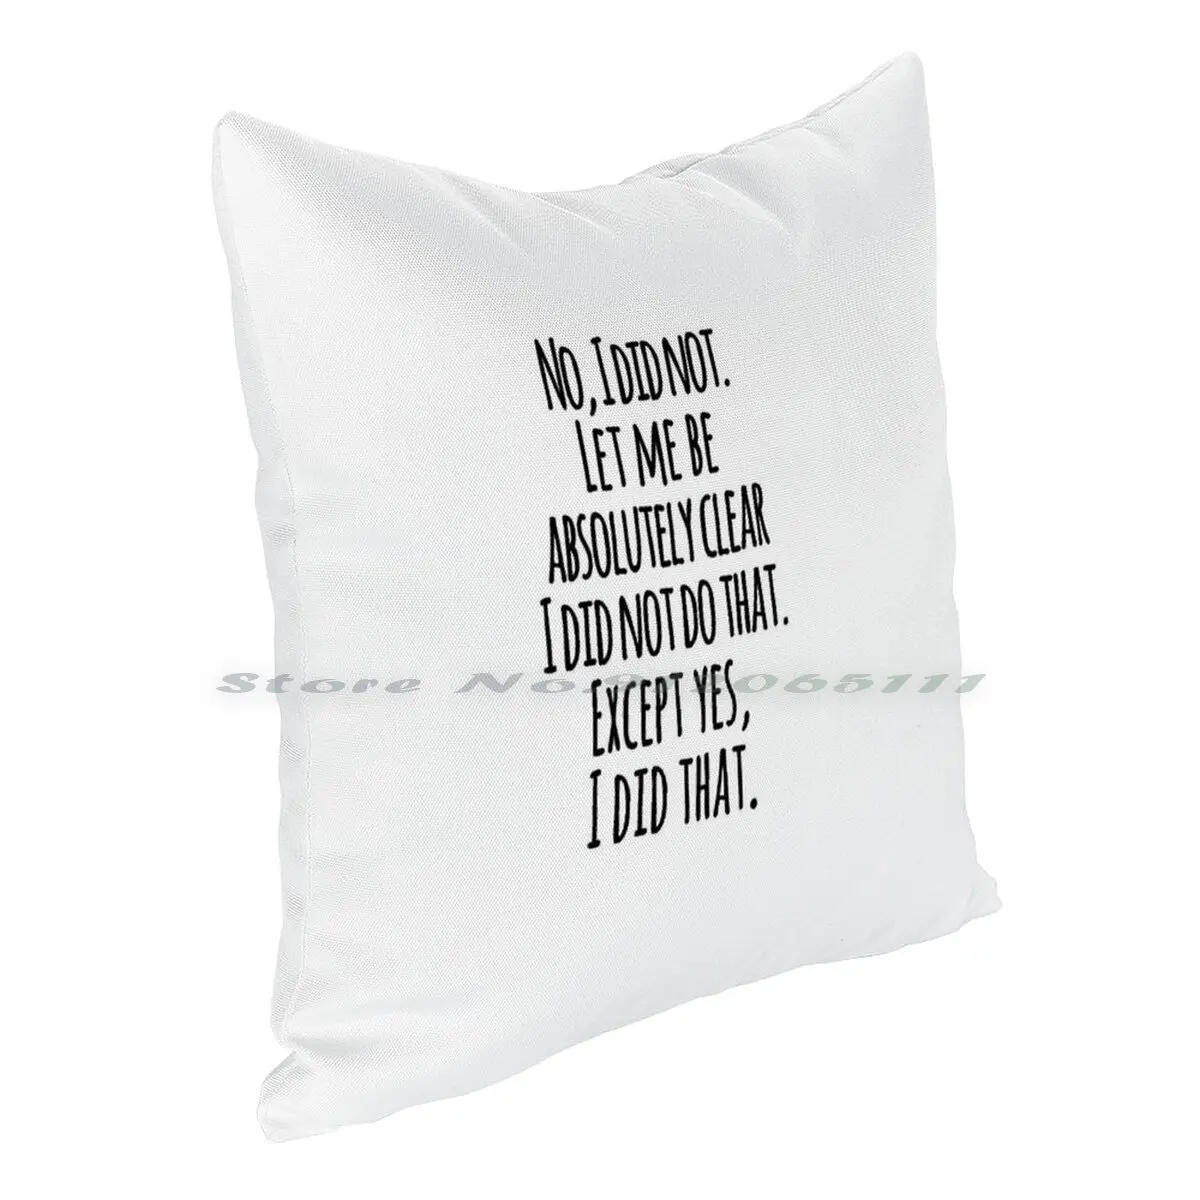 https://ae01.alicdn.com/kf/H9738519938704a52bc6b7d83e4aadbc9B/I-Did-Not-Pillow-Case-Throw-Pillow-Cover-Cotton-Linen-Flax-The-West-Wing-Quotes-Josh.jpg